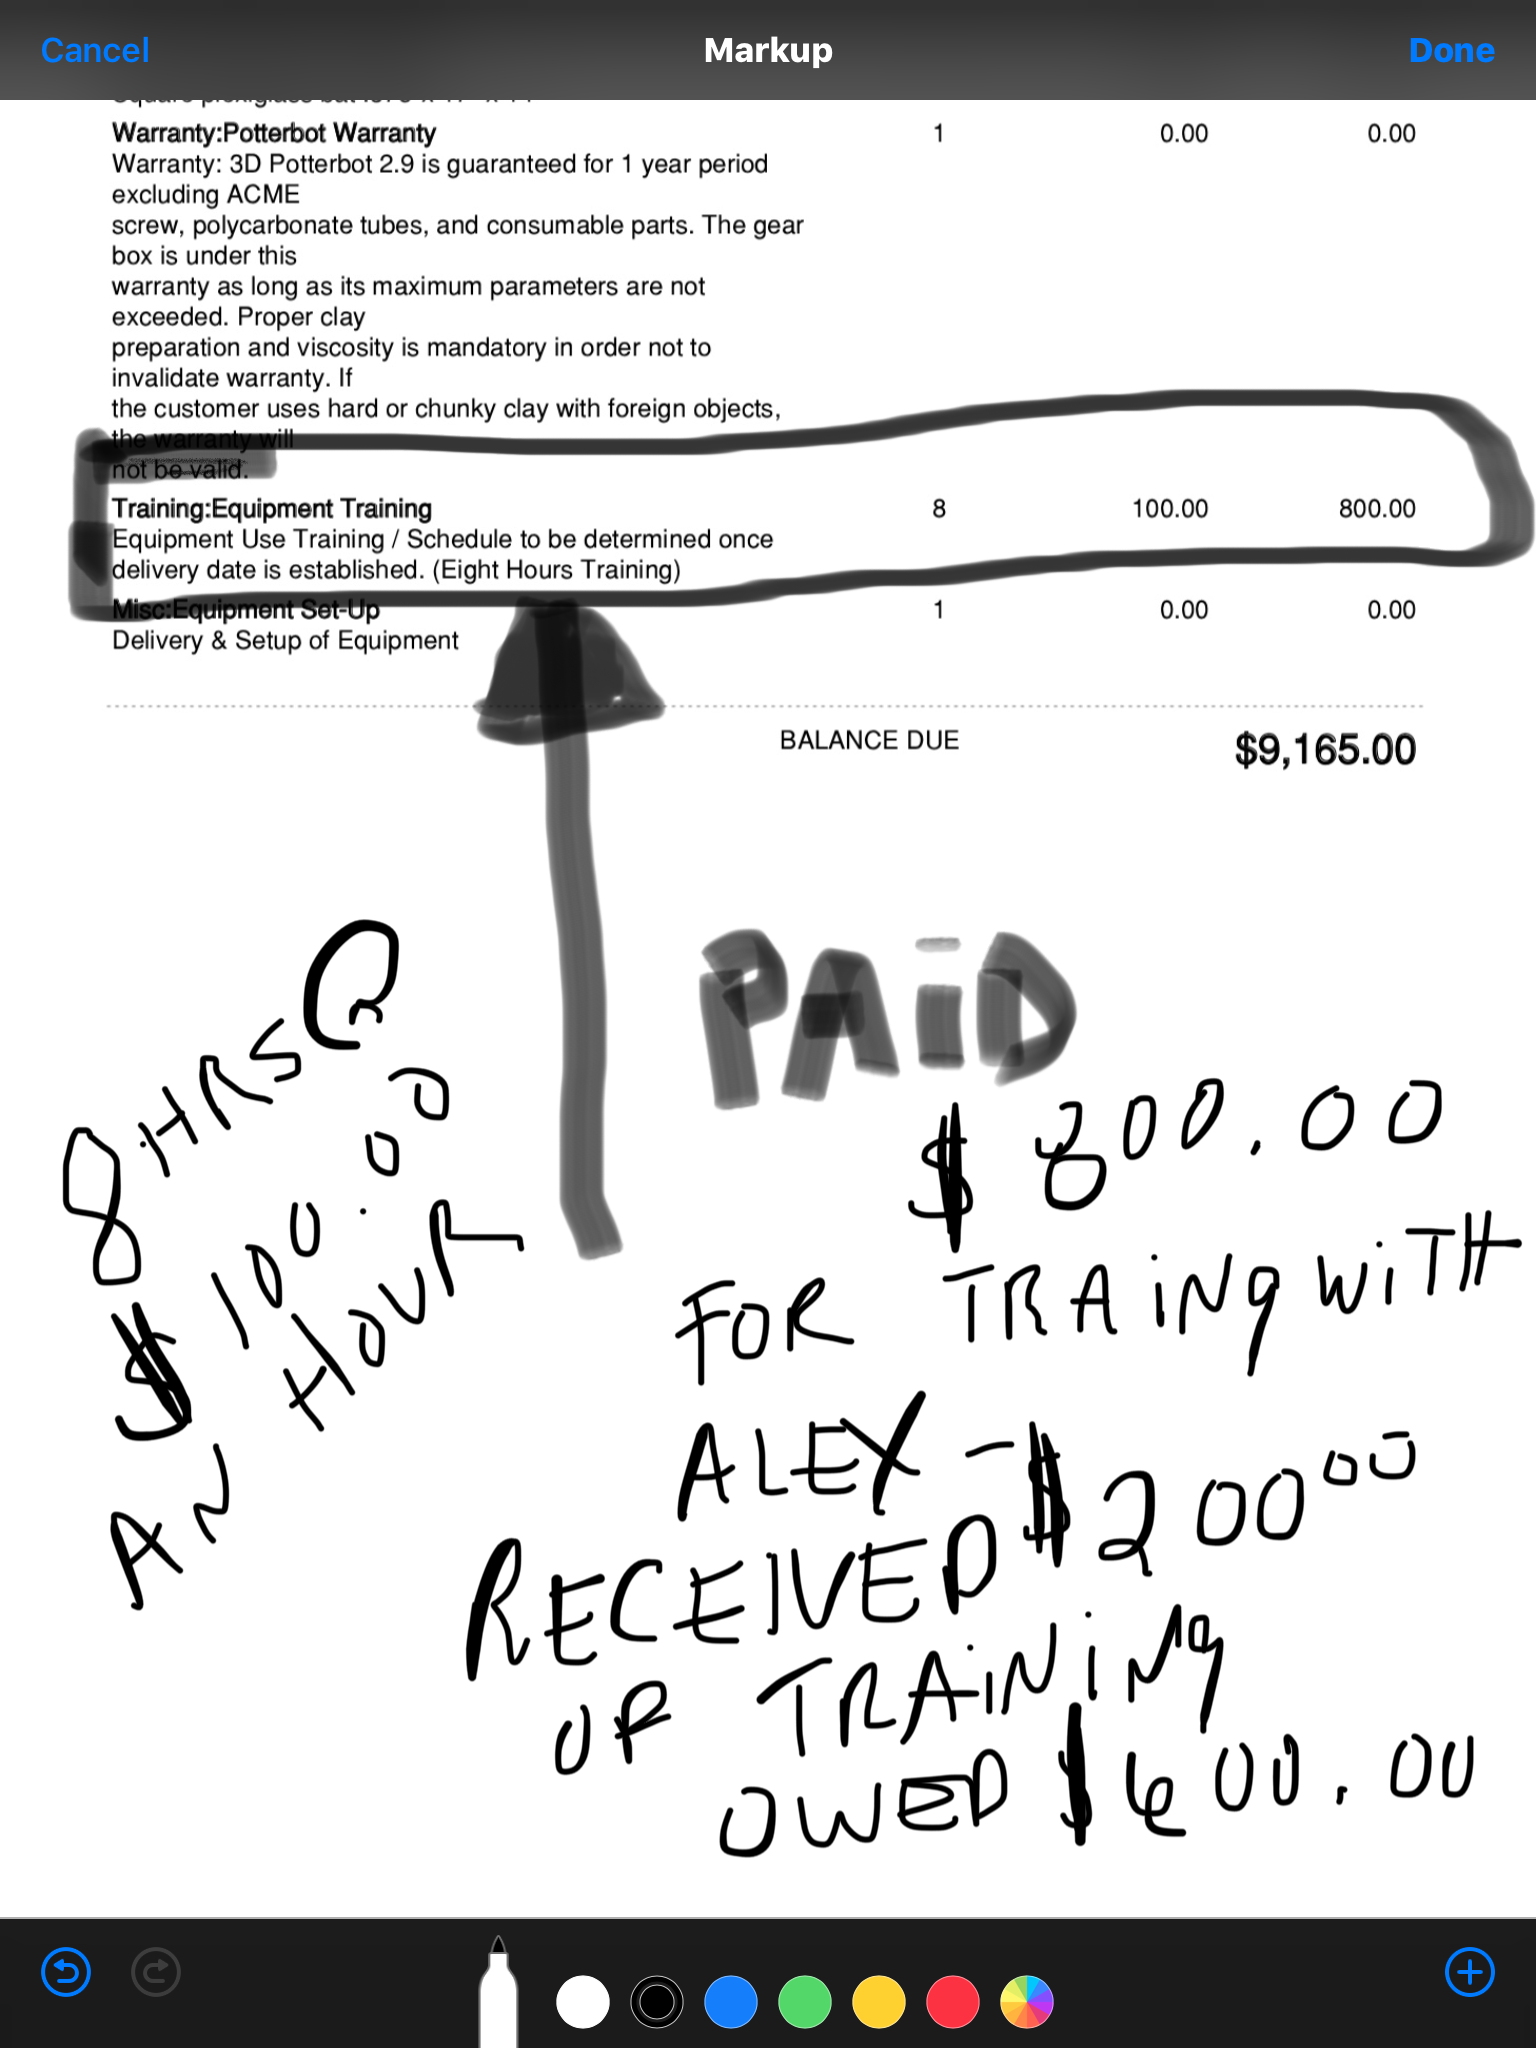 INVOICE FROM ALEX PROVING THAT I PAID FOR TRAINING